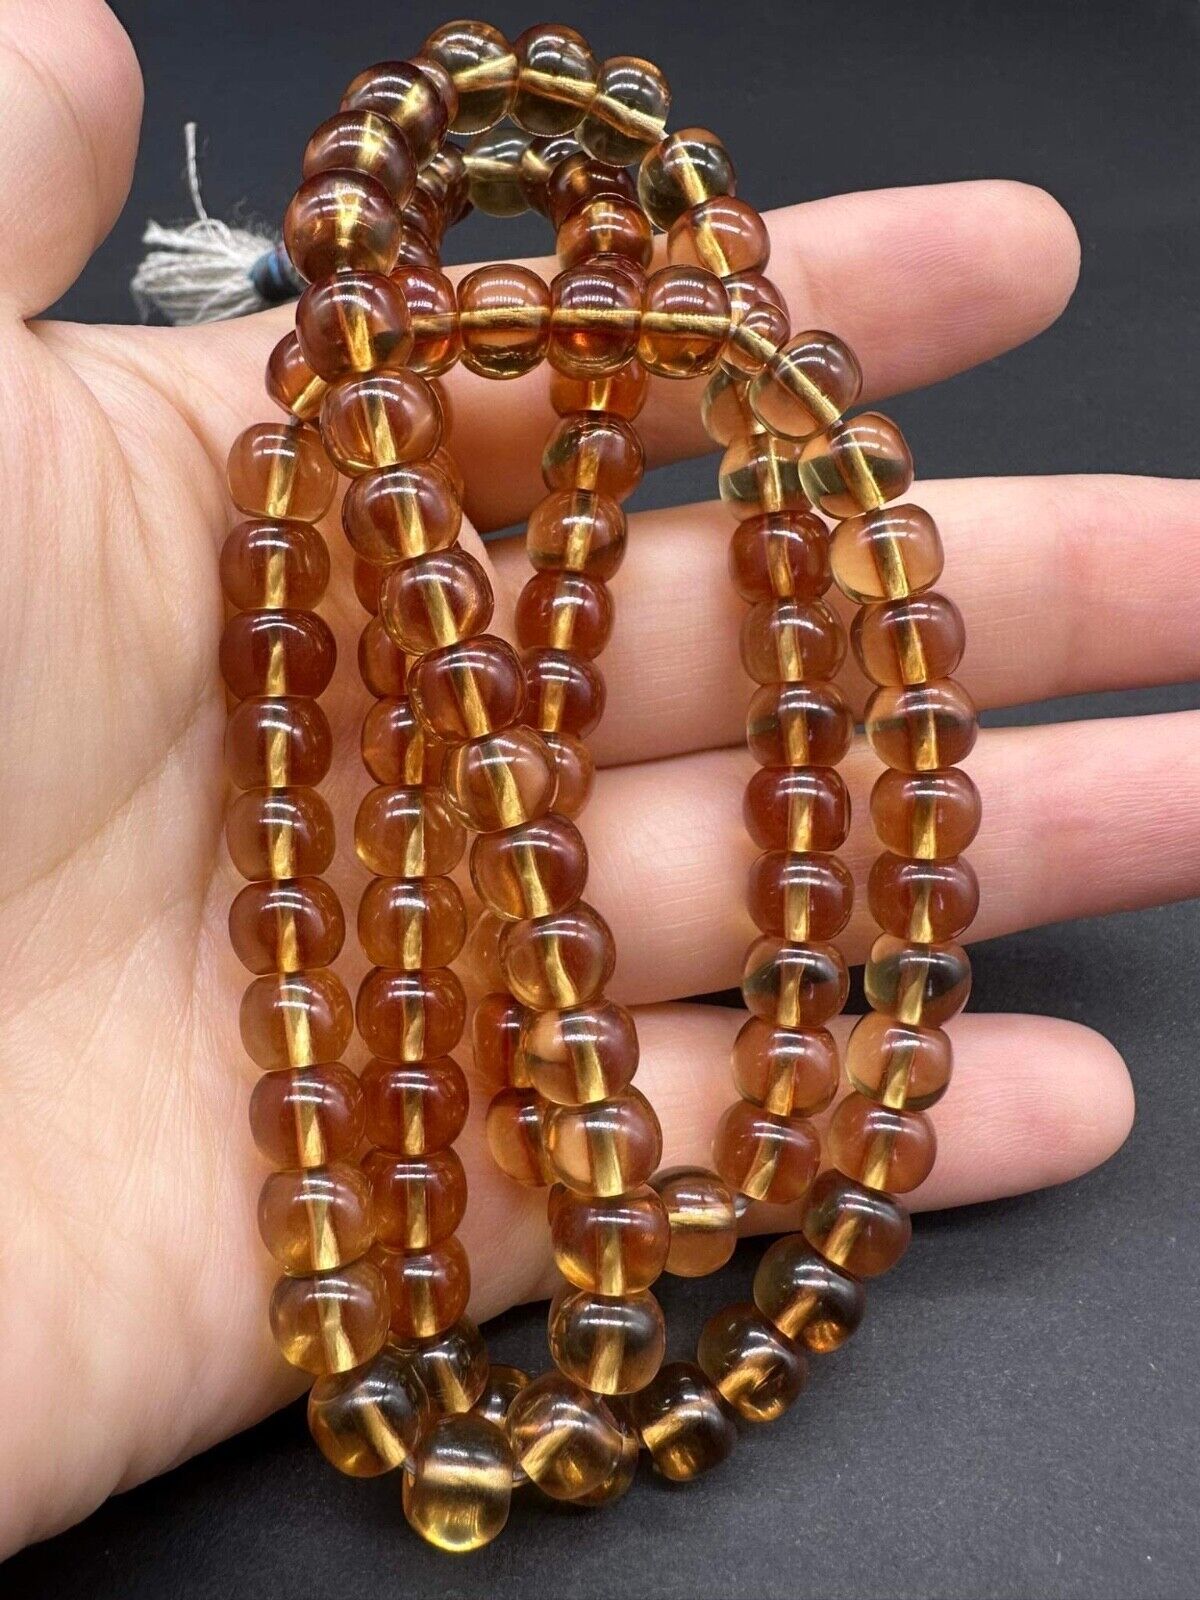 A Very Fine Old Natural Sandalos Islamic Rosary Prayer Beads From Syria